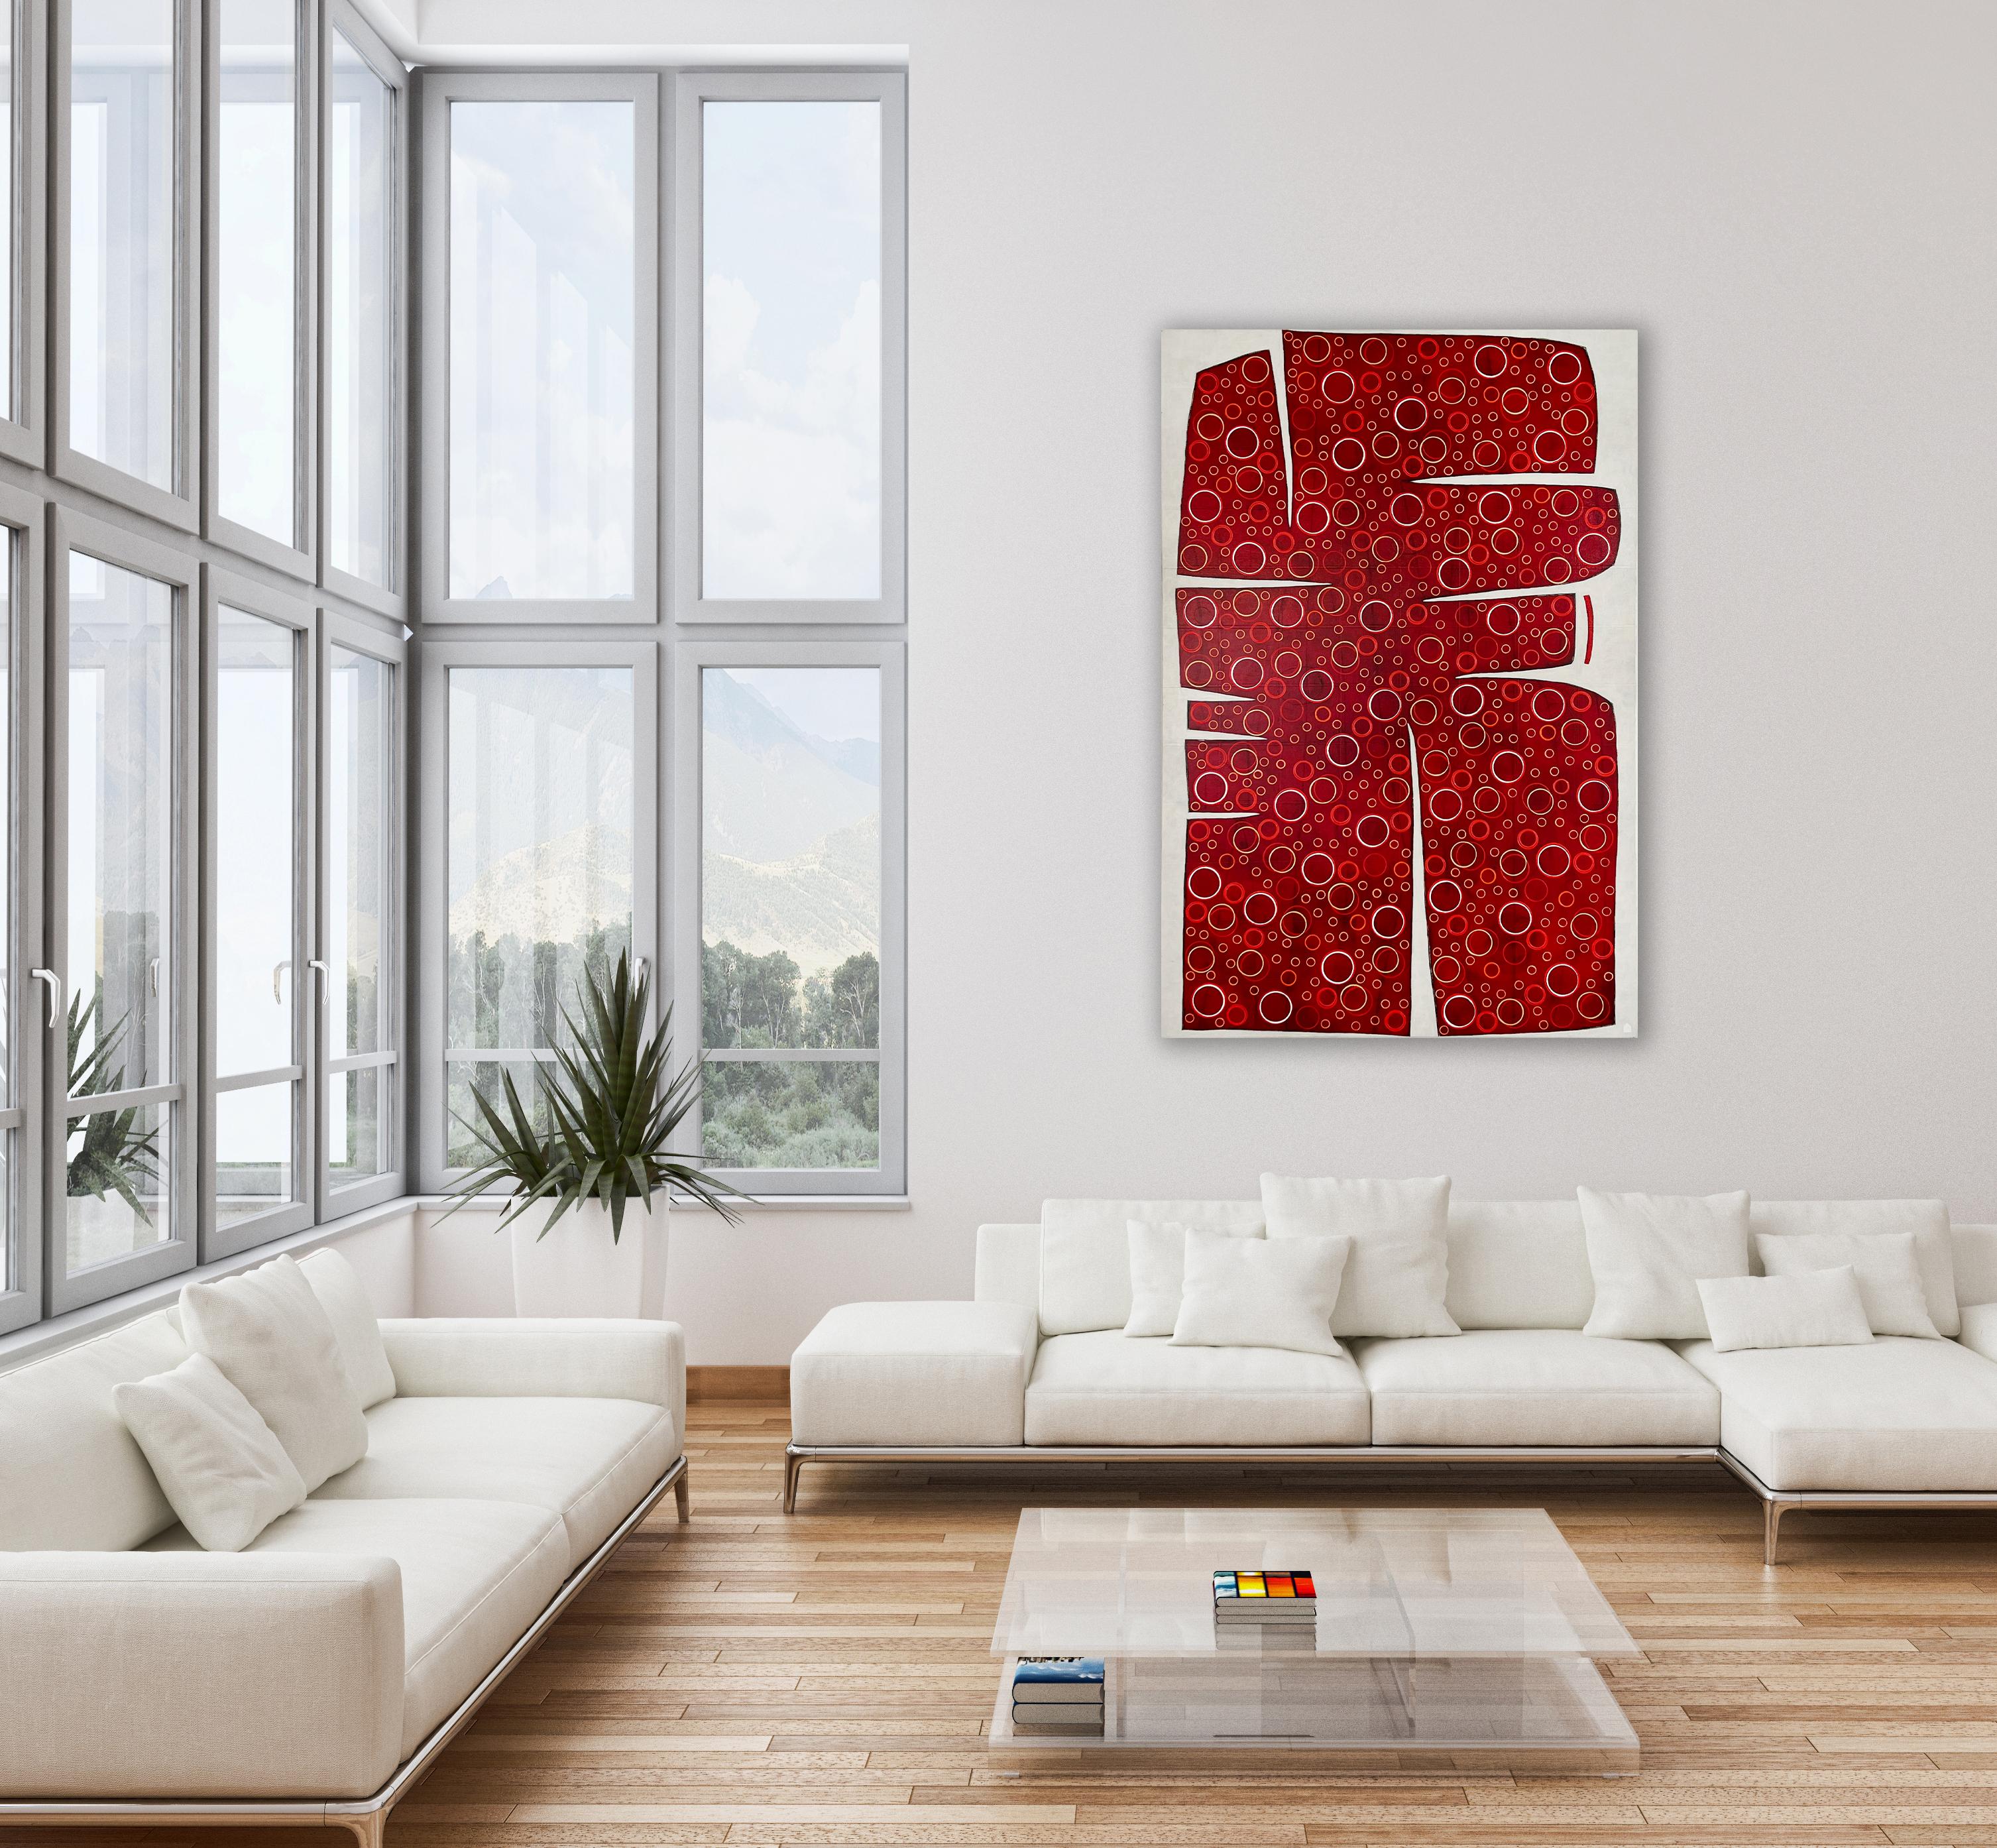 This large abstract statement painting by Sofie Swann is made with acrylic paint on canvas. It features an organic abstract red shape that covers almost the entire canvas, leaving a small border of painterly off-white around it. The shape is a deep